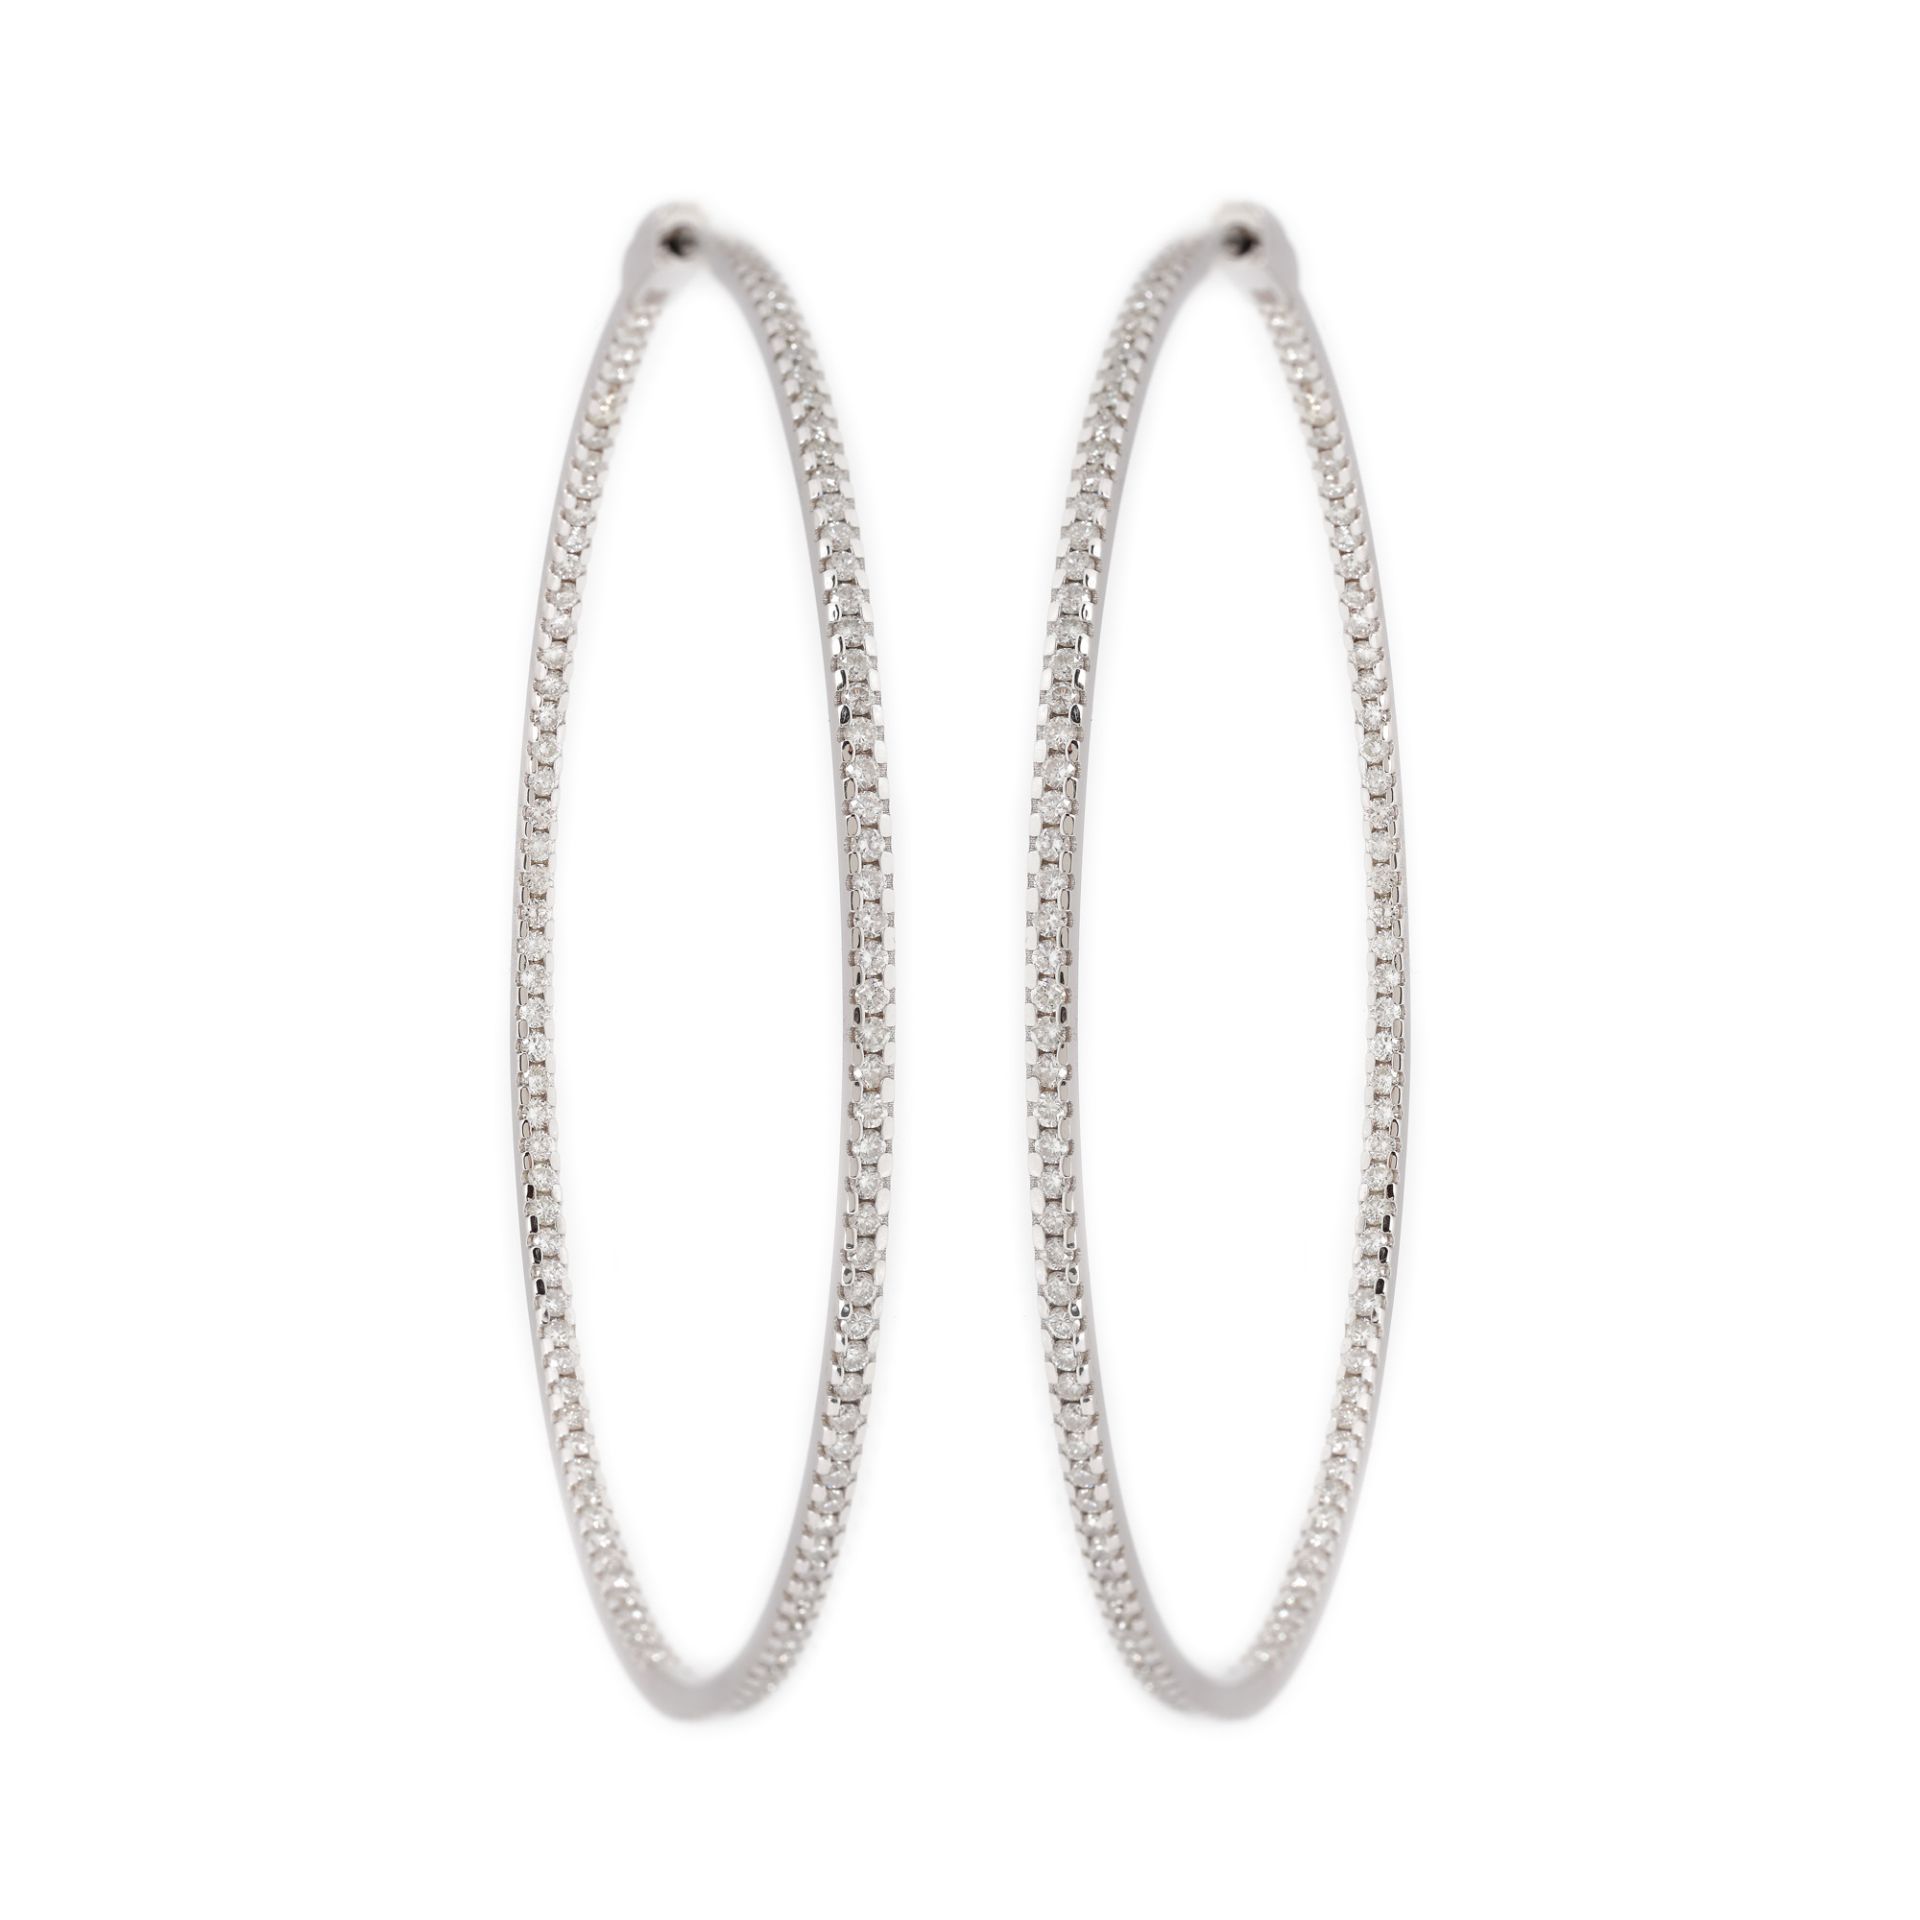 Pair of circular earrings, white gold, decorated with diamonds